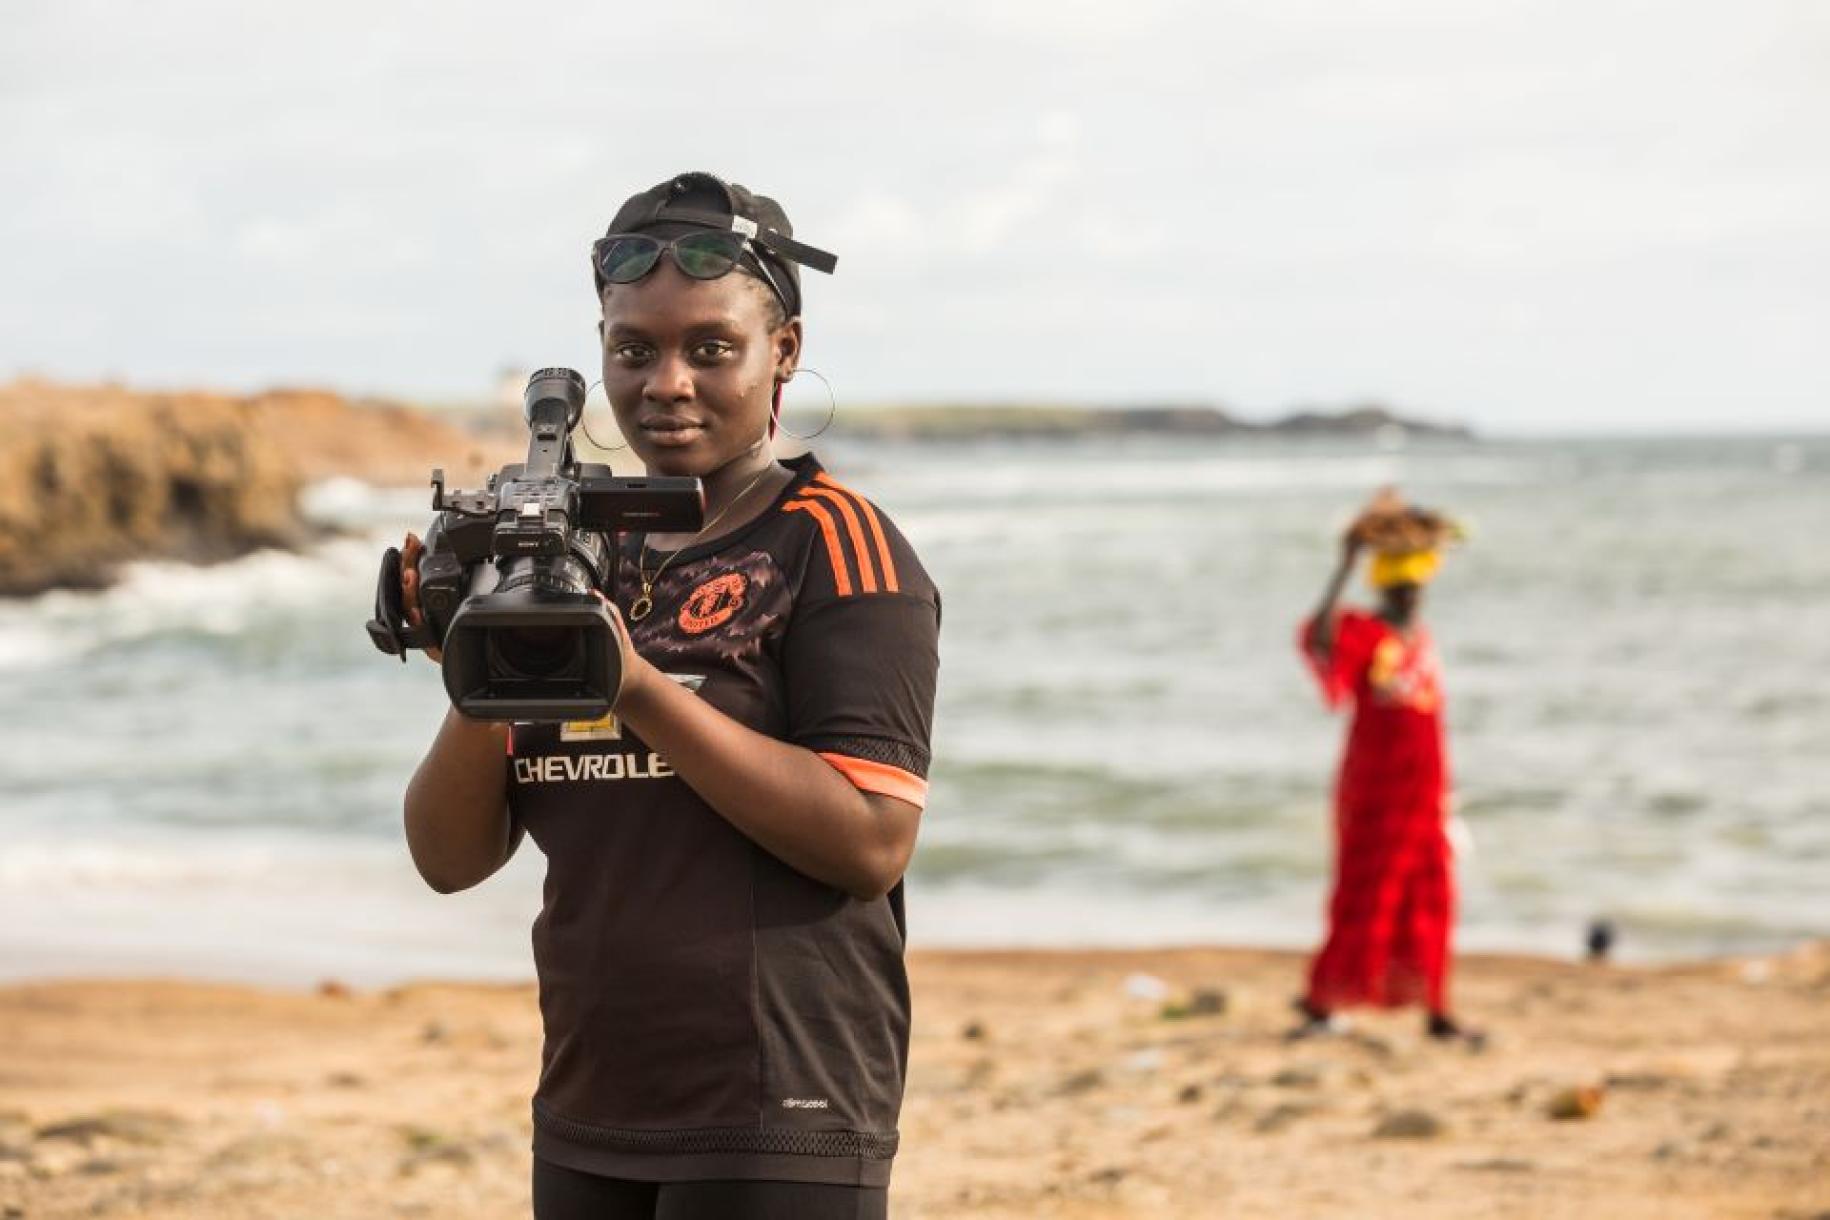 Oumou Kalsoum Diop, 18, poses for a portrait with her video camera on the beach in Dakar.